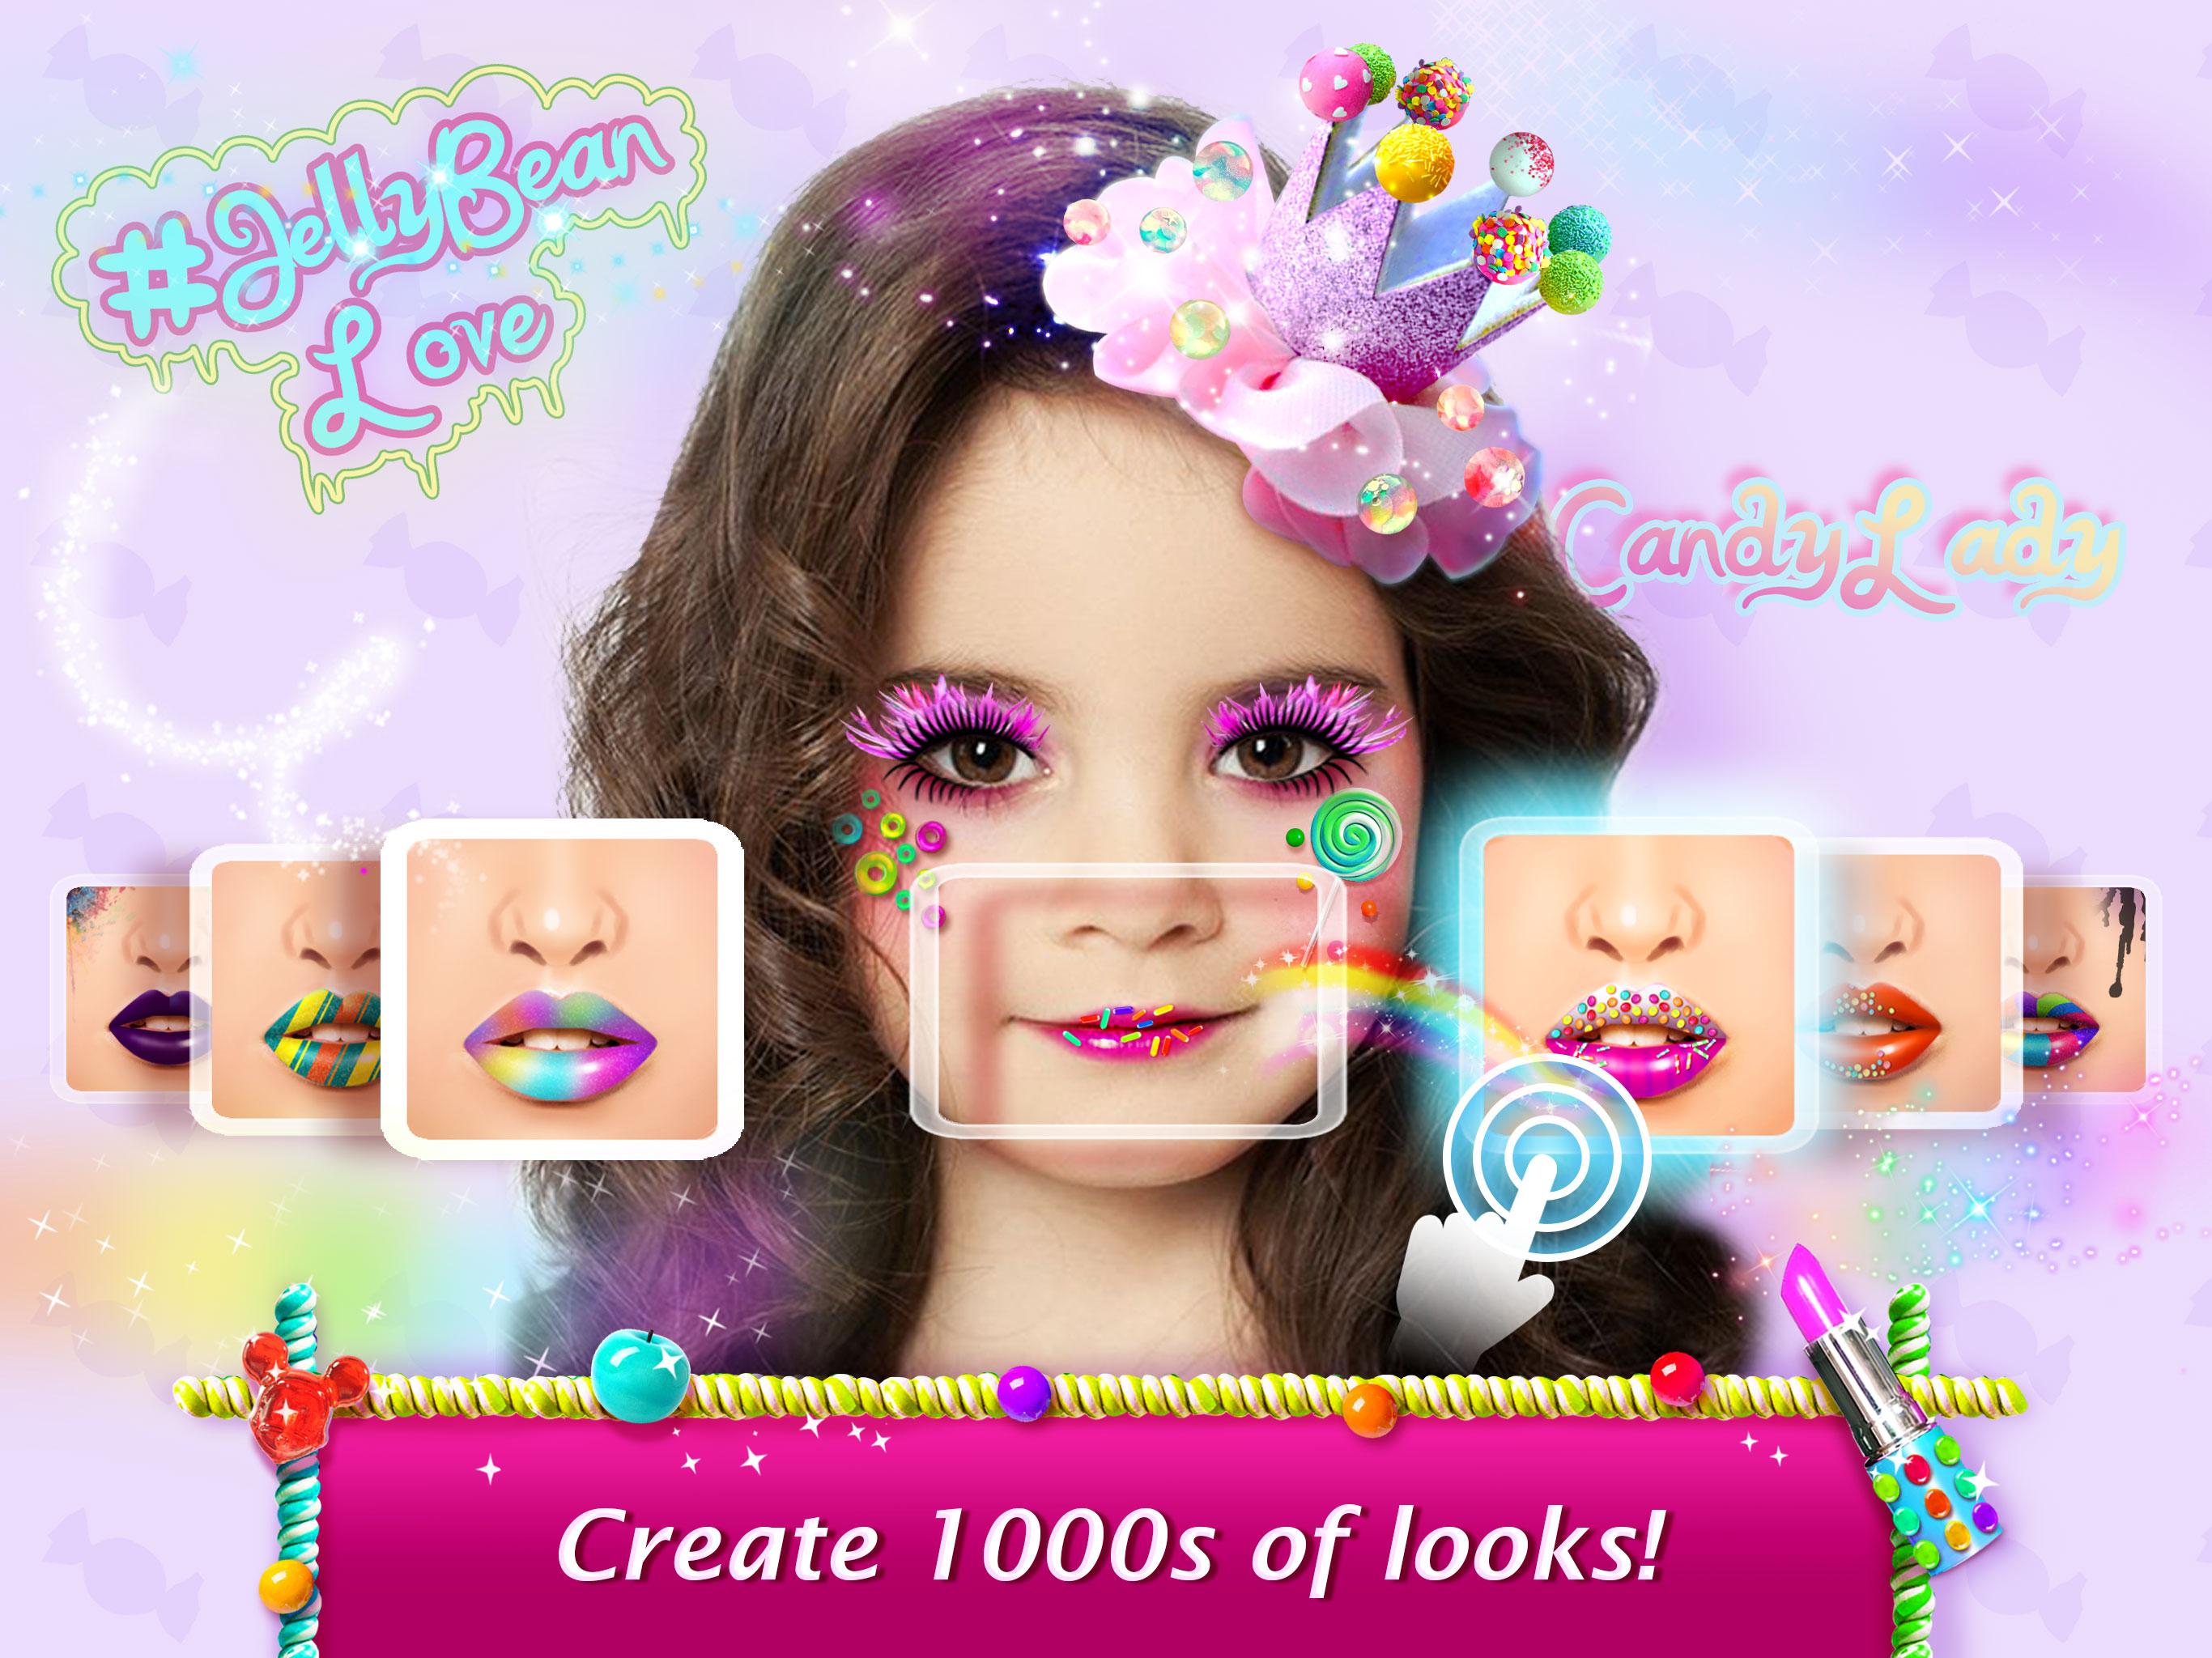 Android application Candy Mirror ❤ Fantasy Candy Makeover & Makeup App screenshort